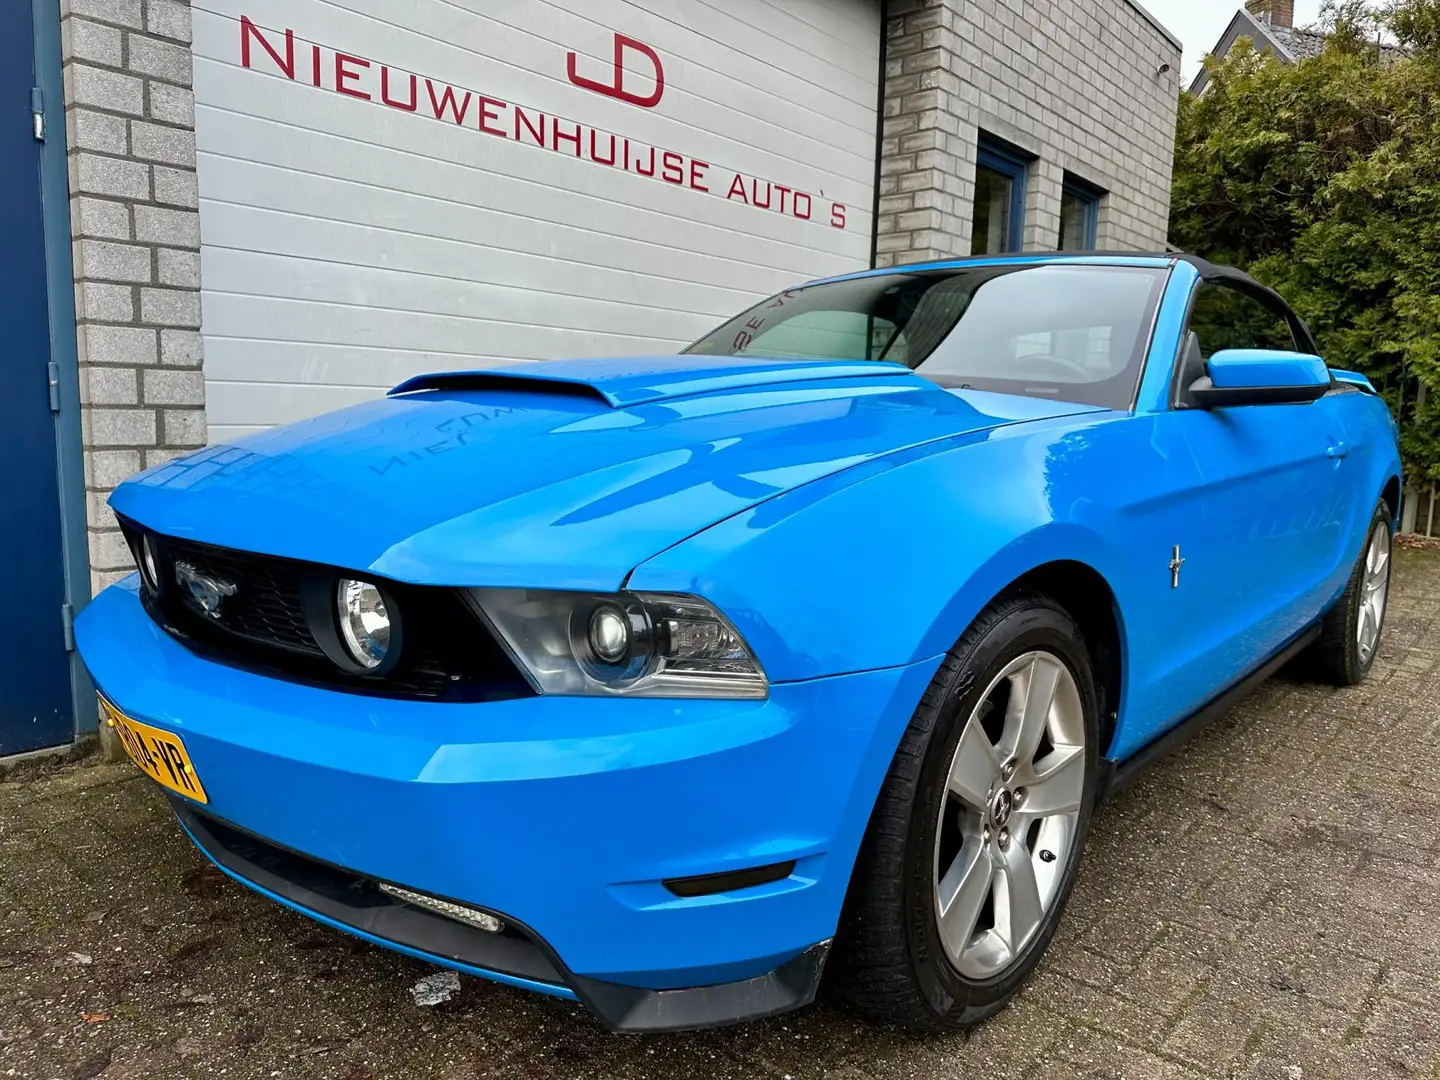 Ford Mustang 4.6 V8 automaat, nieuw model 2010!, youngtimer!! Blauw - 1